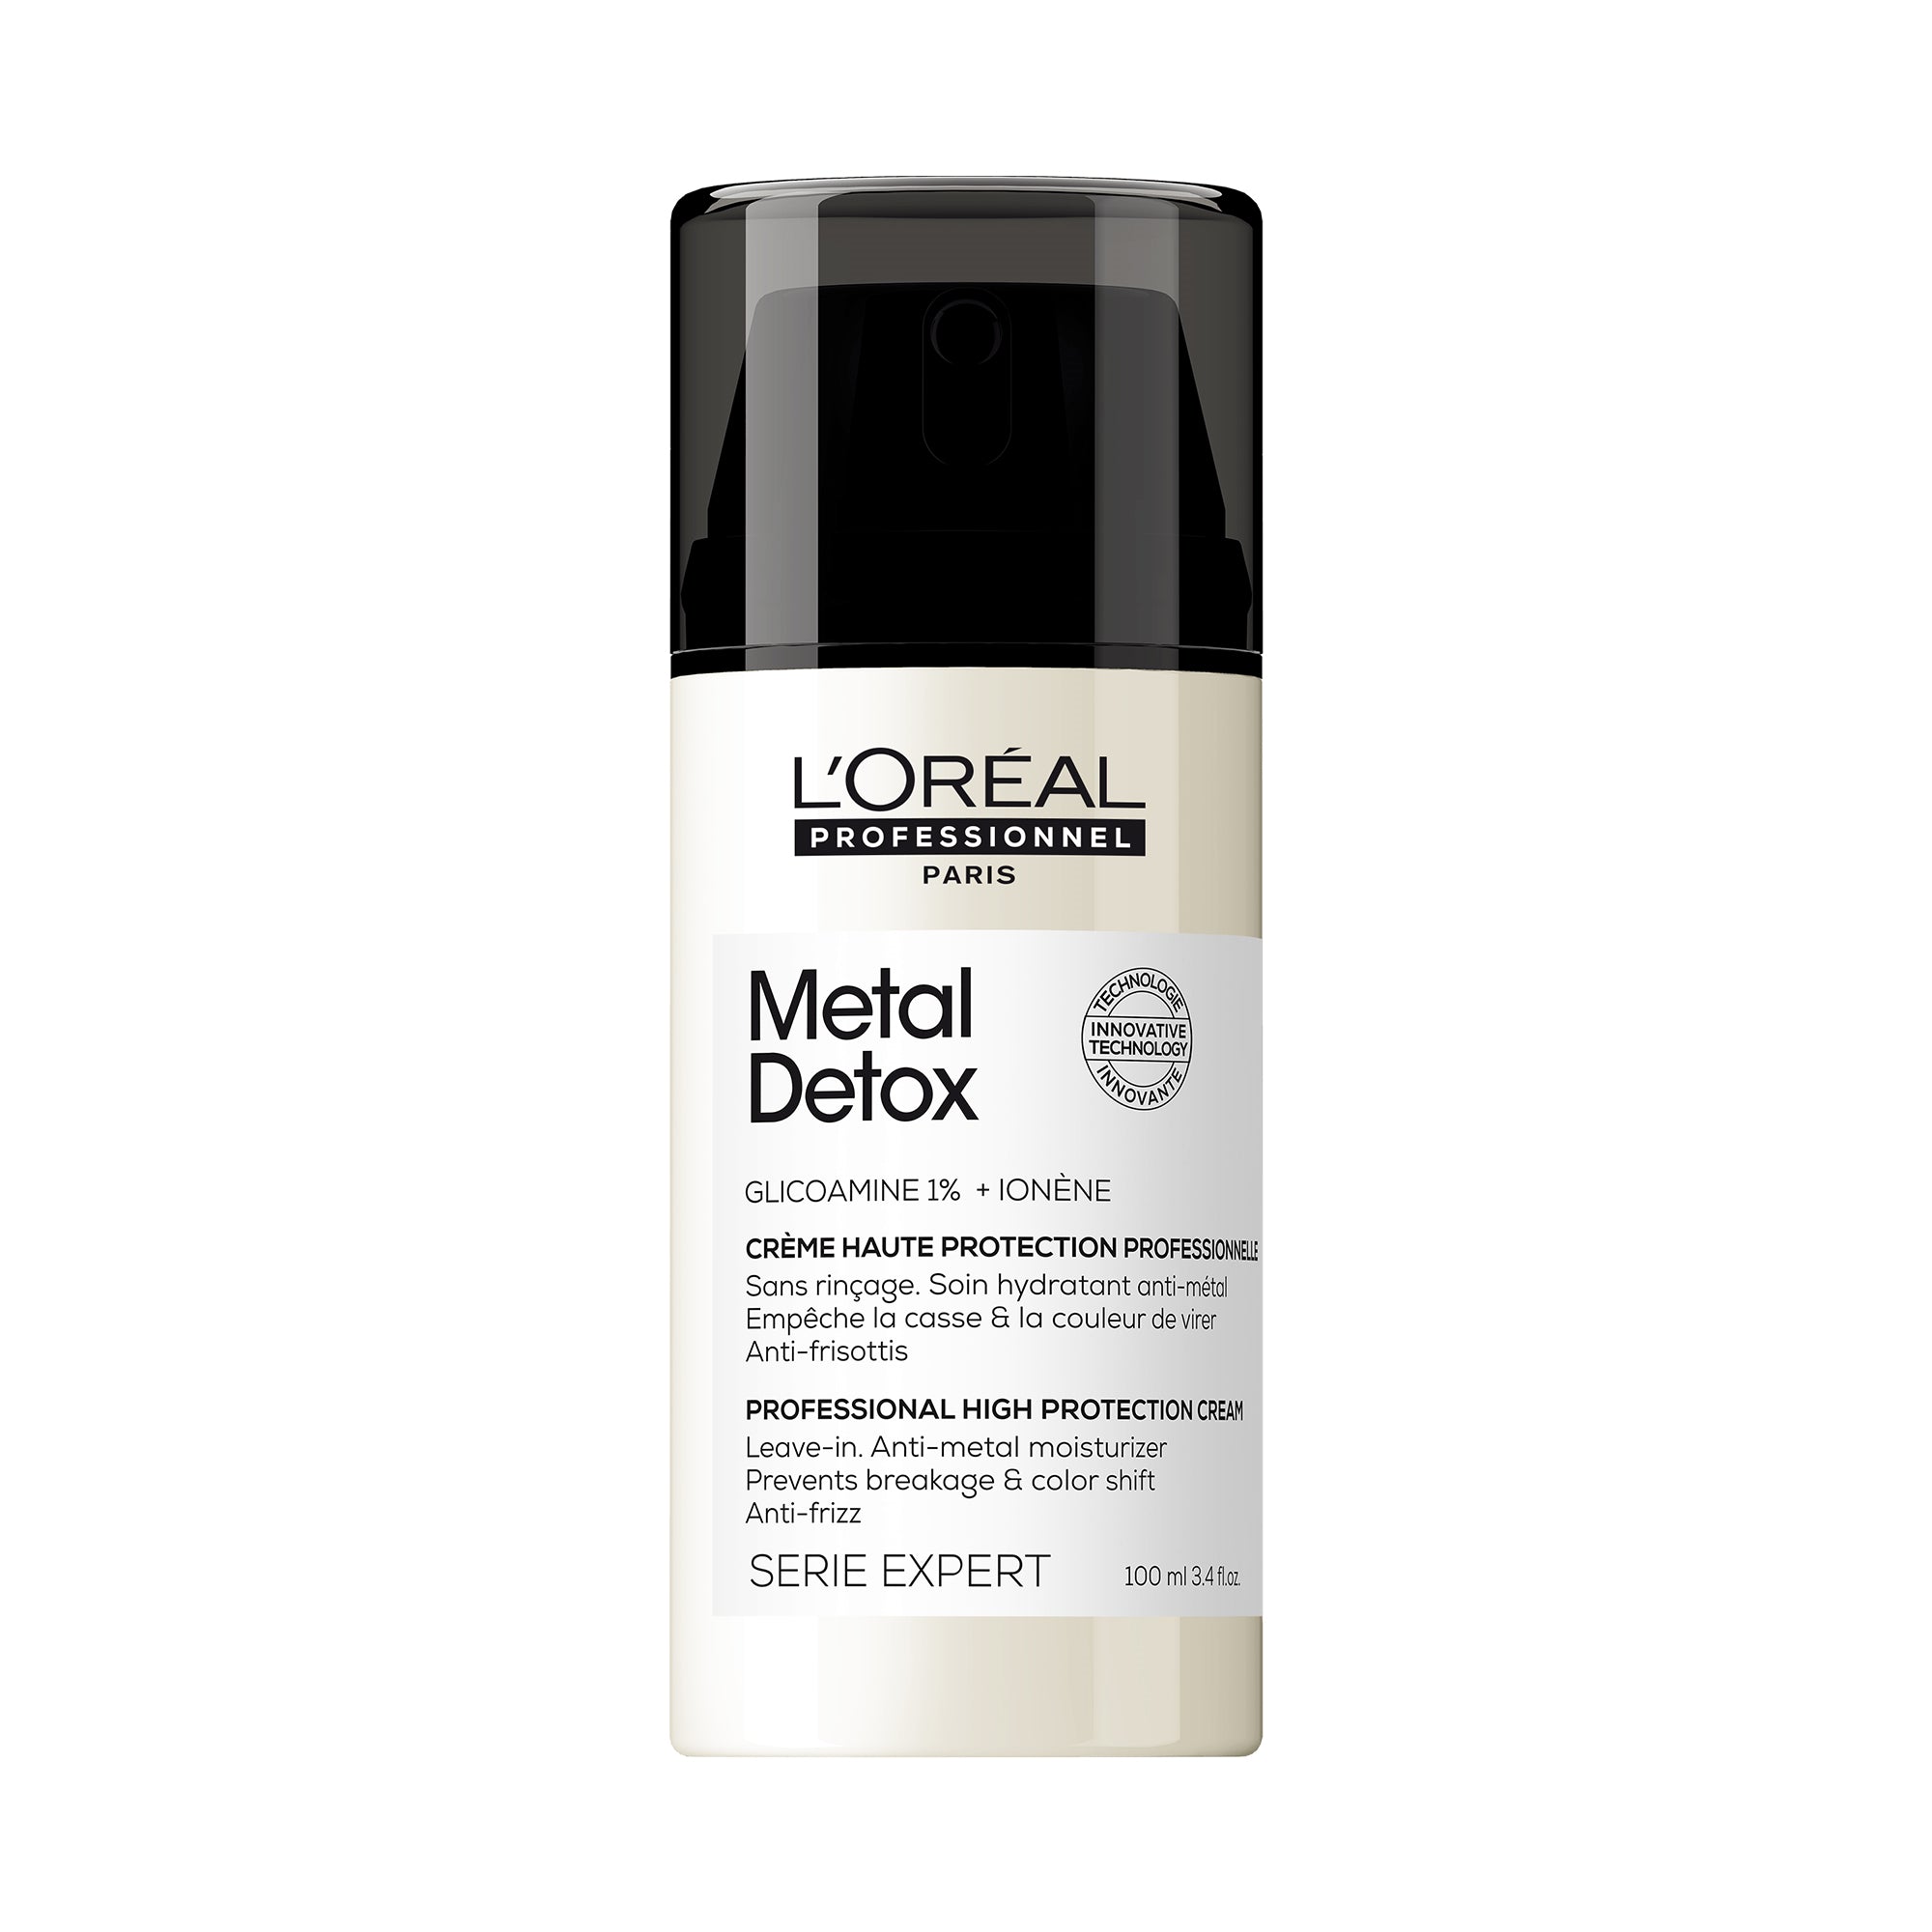 L'Oreal Metal Detox Leave-In Styling Cream